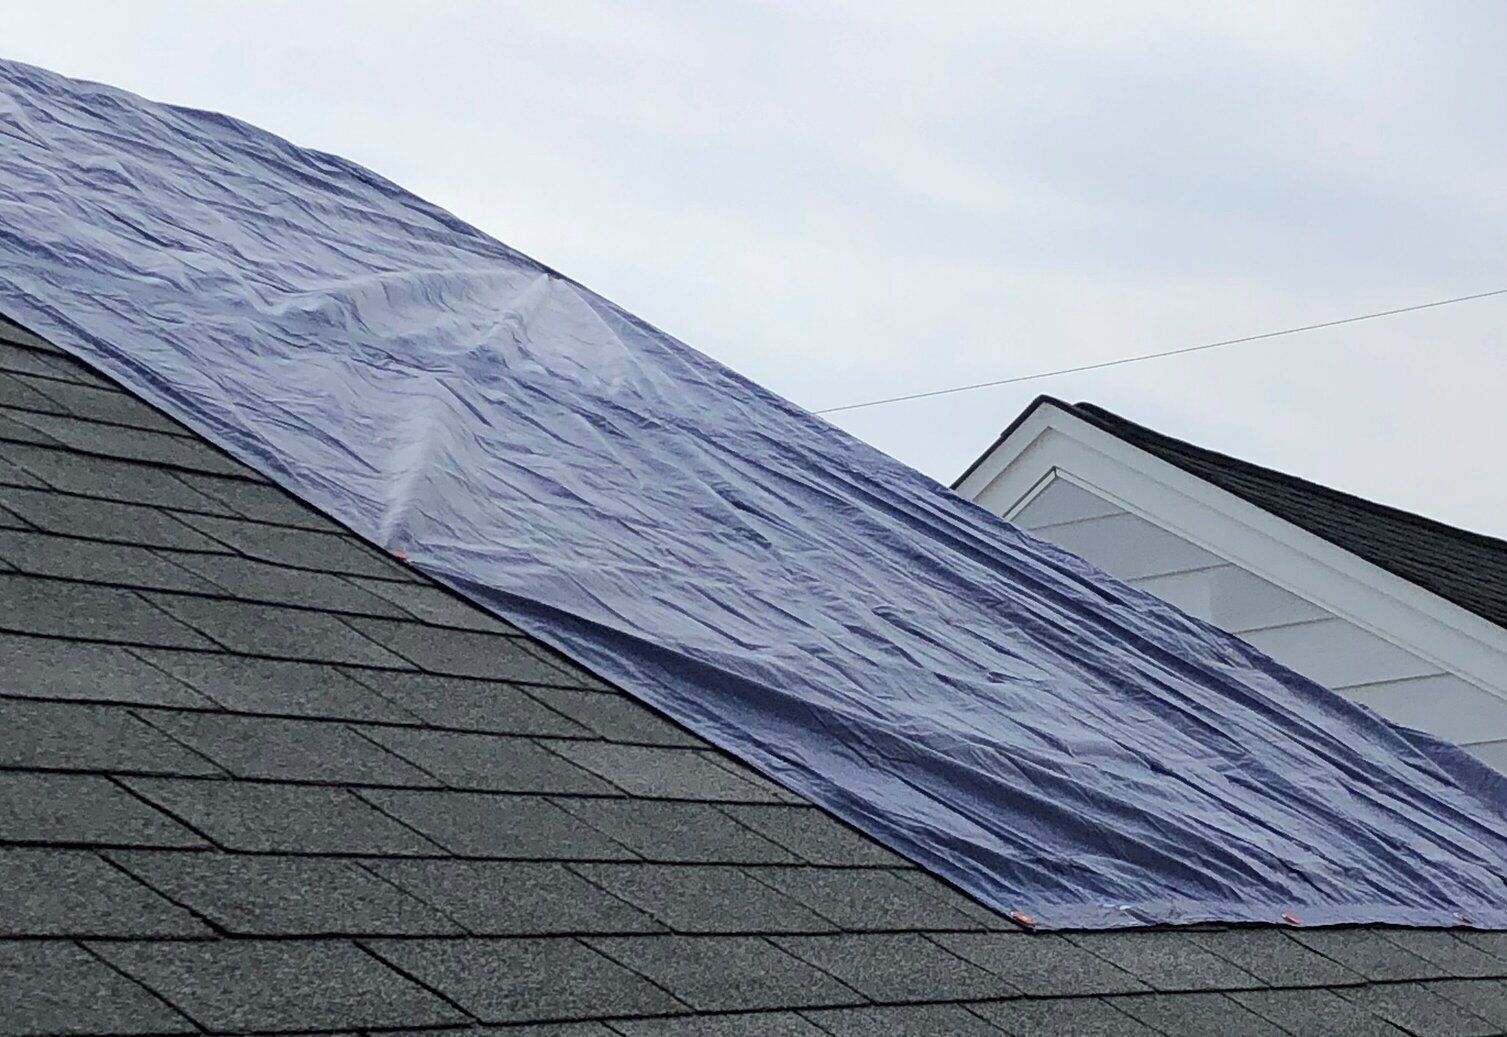 What should you do if you've experienced storm damage on your roof